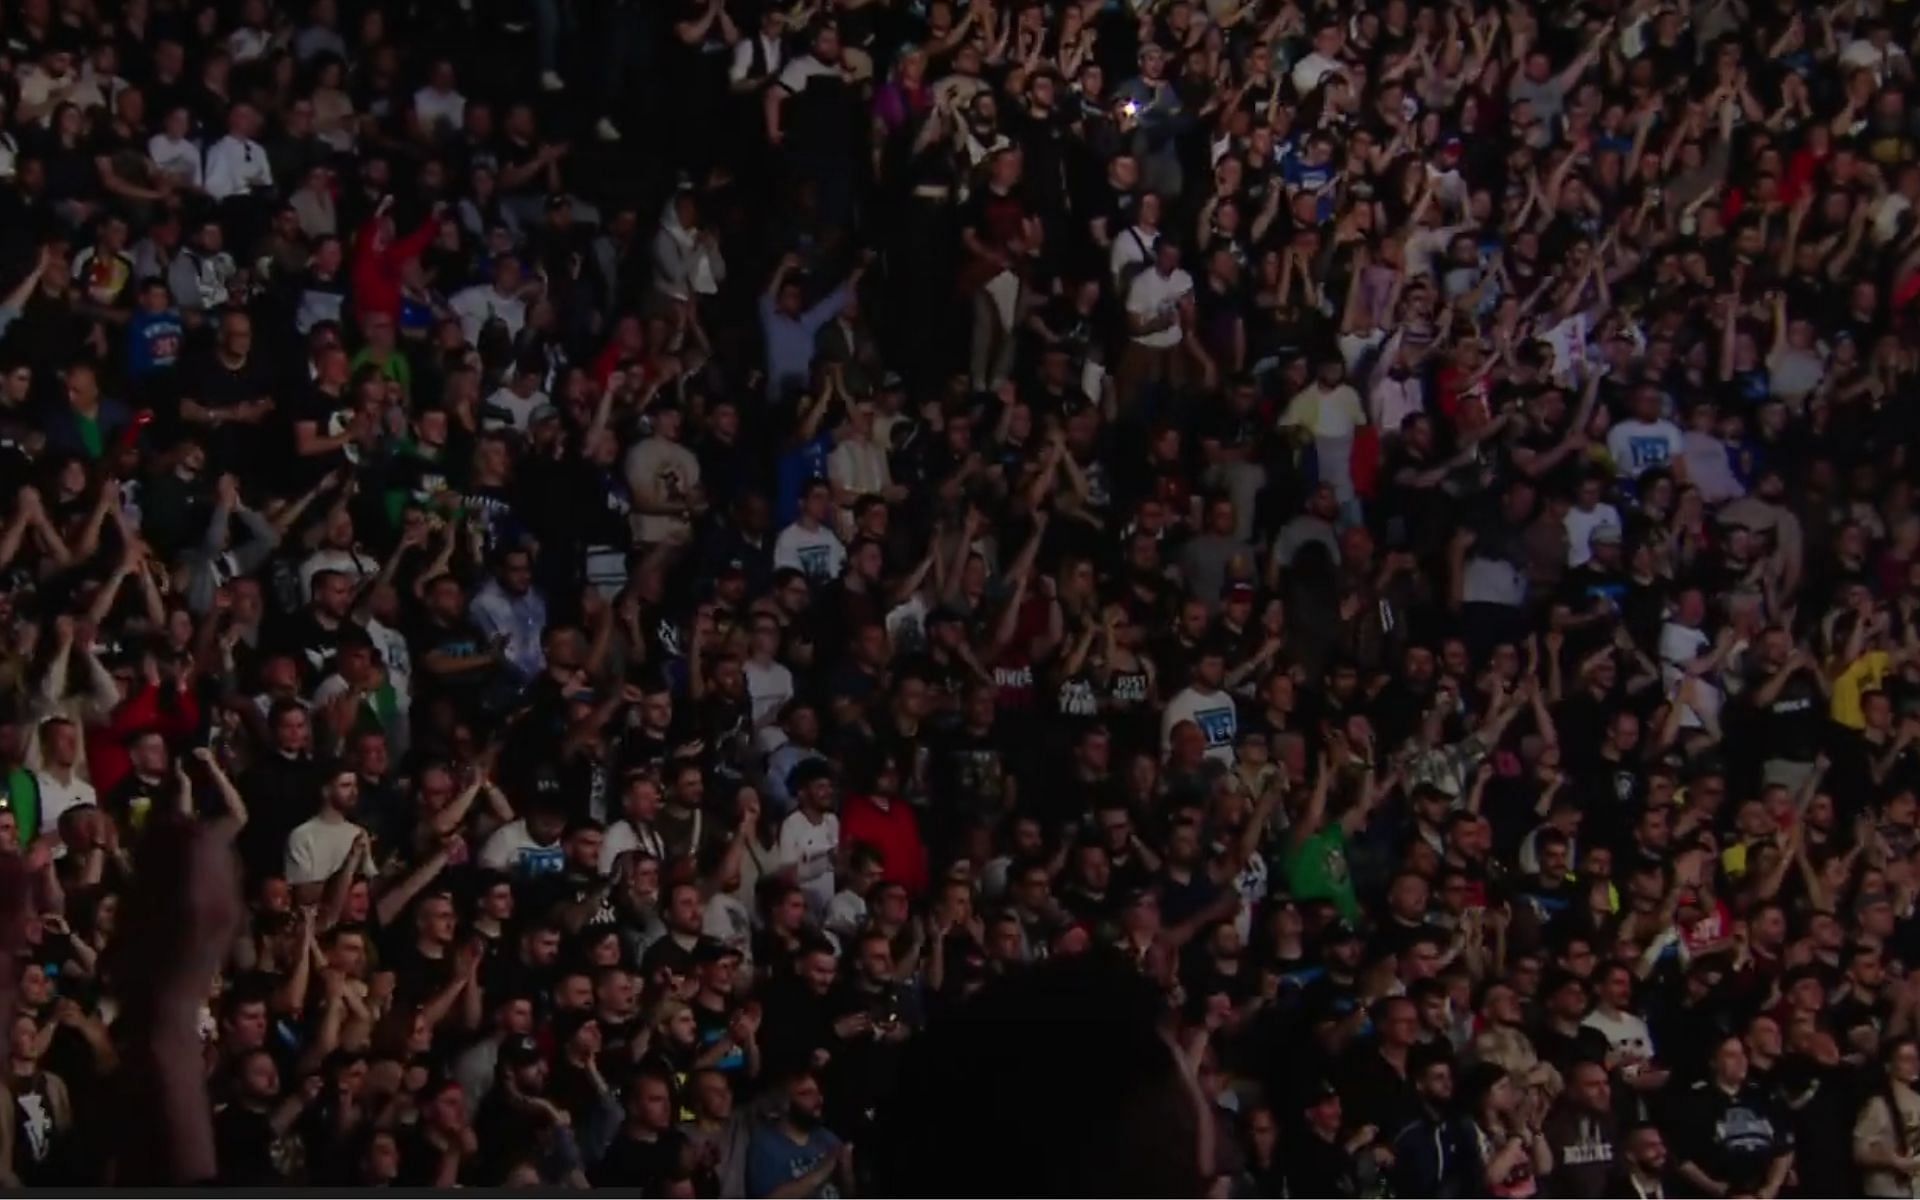 The crowd in Lyon, France (Pic Courtesy: WWE on YouTube)